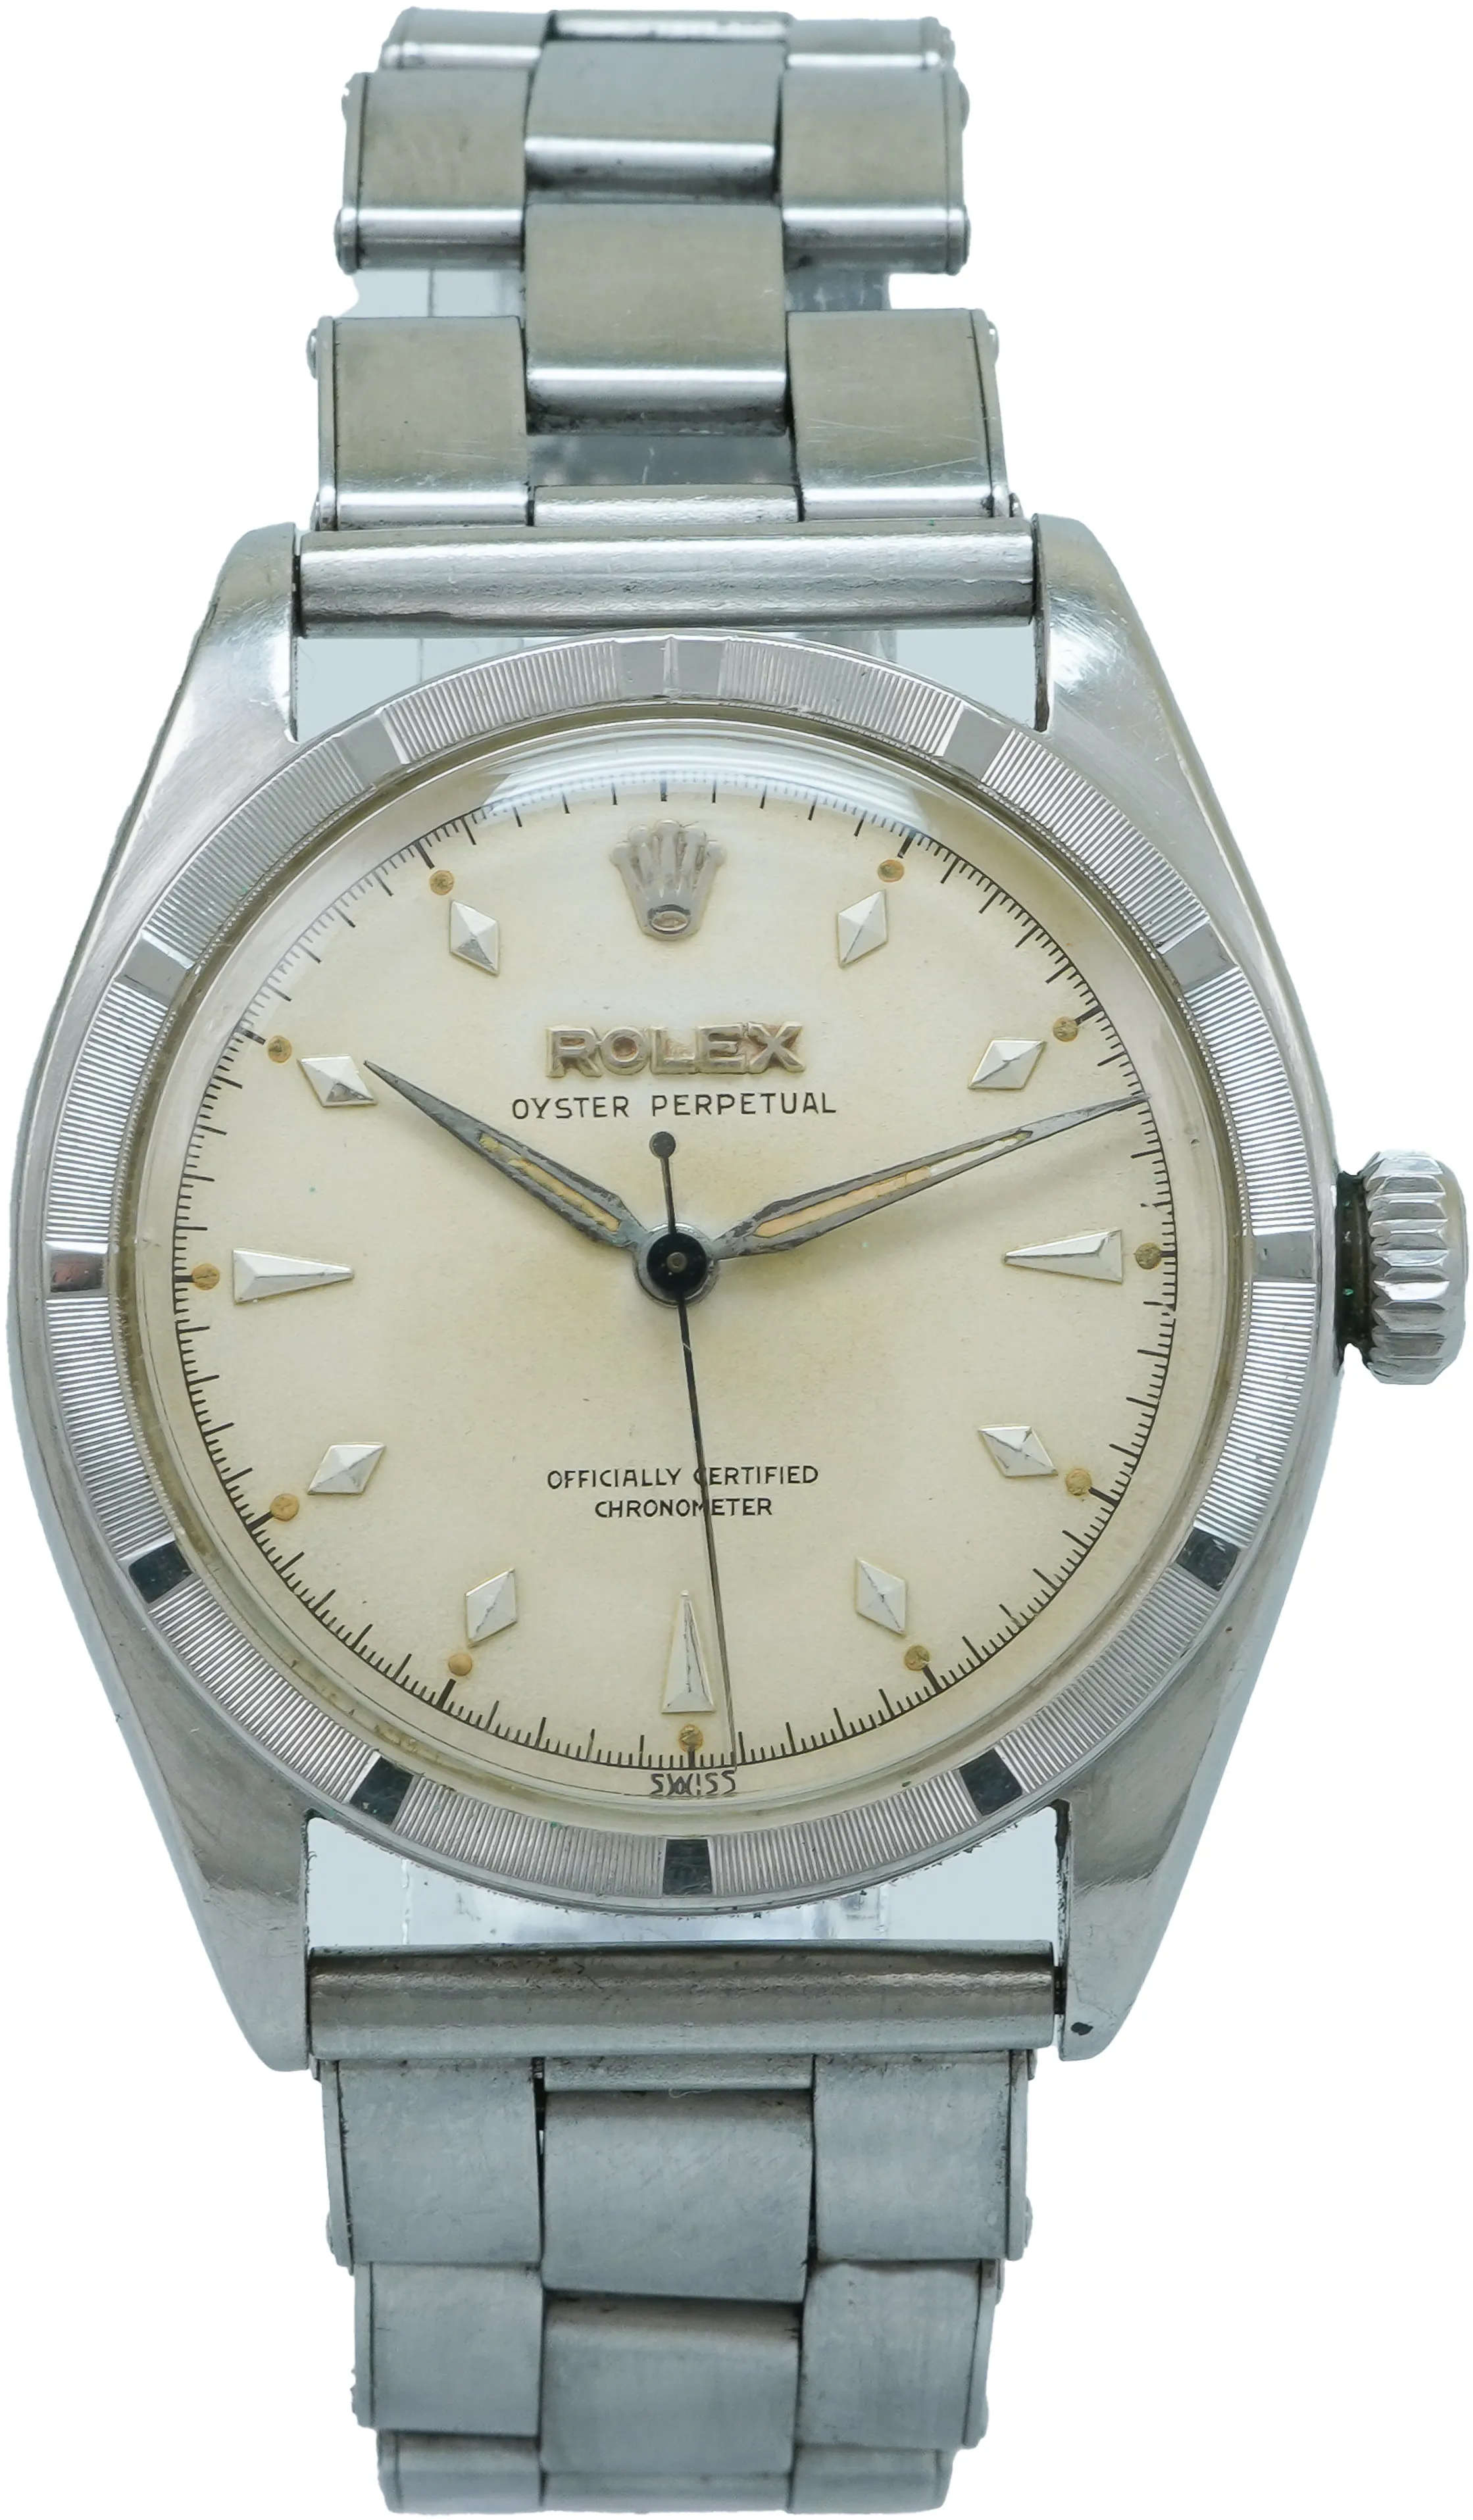 Rolex Oyster Perpetual 34 6103 34mm Stainless steel